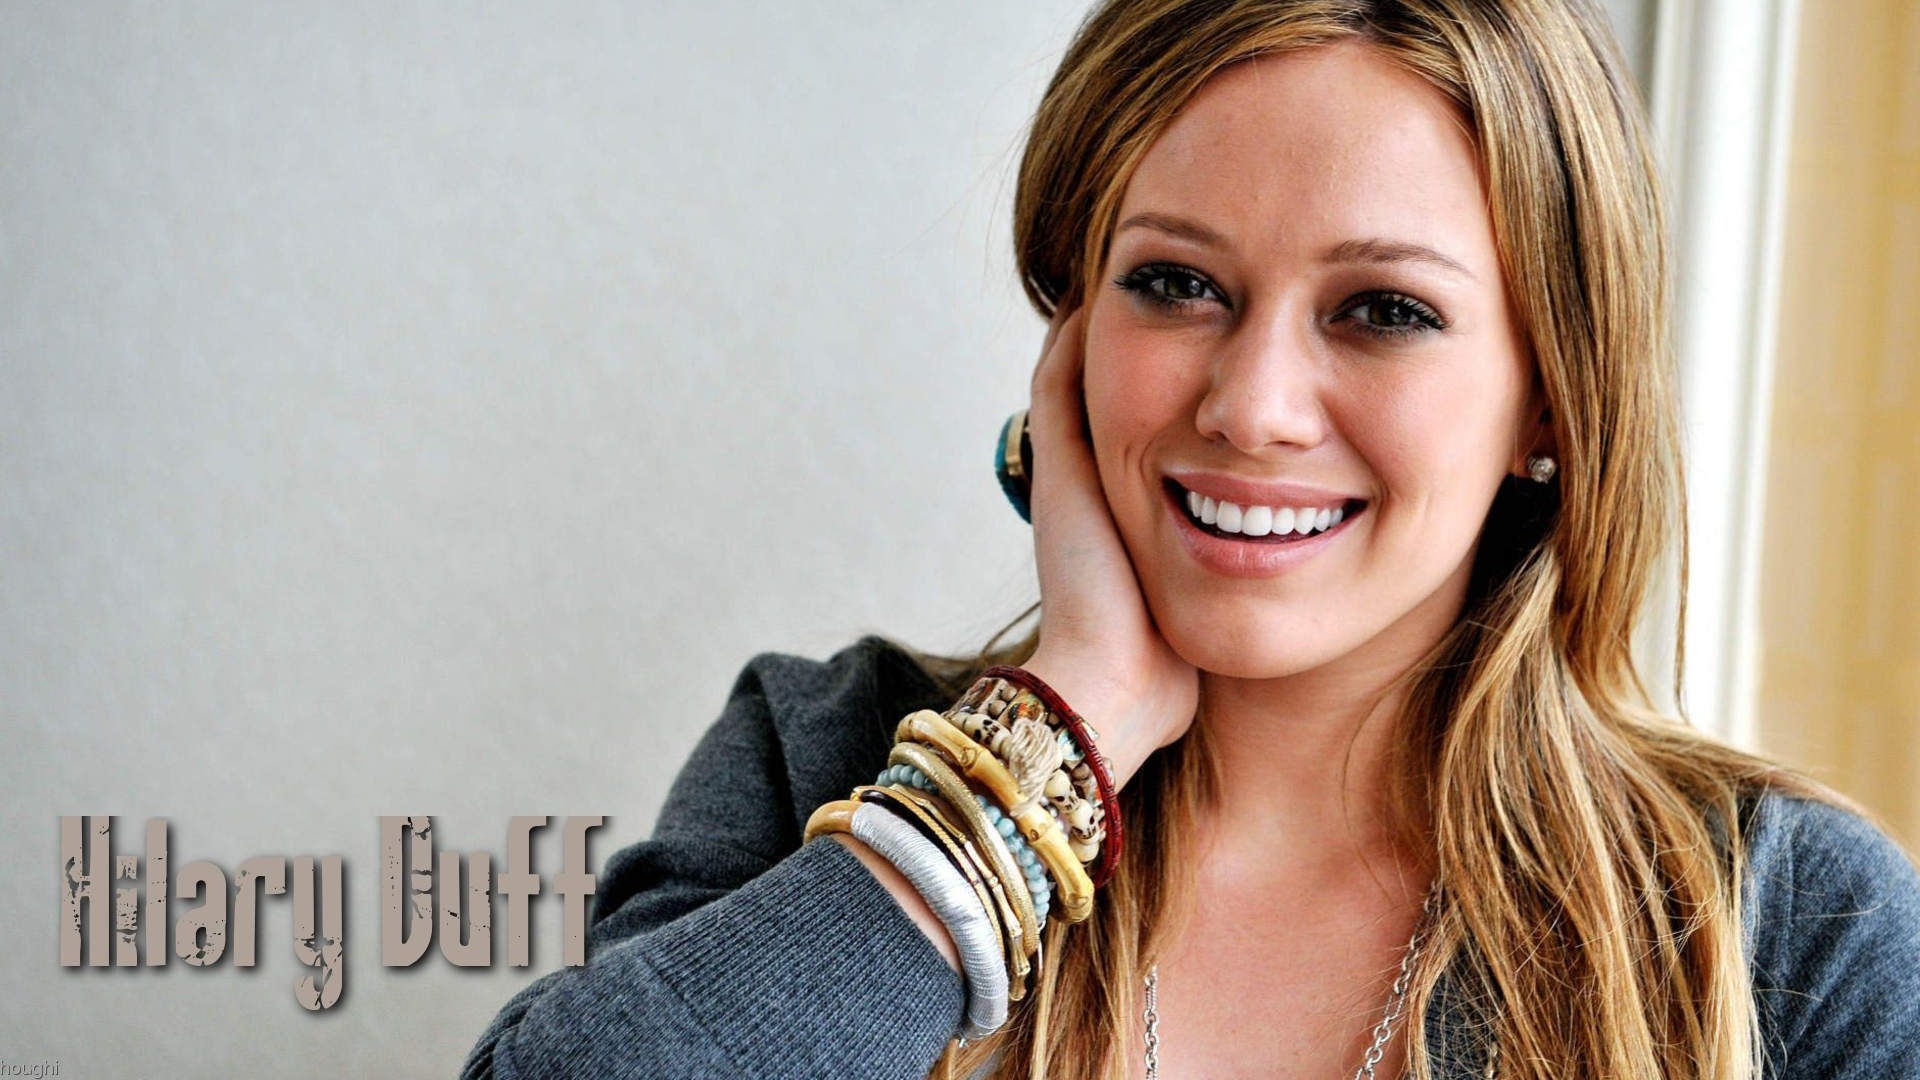 Hilary Duff #061 - 1920x1080 Wallpapers Pictures Photos Images